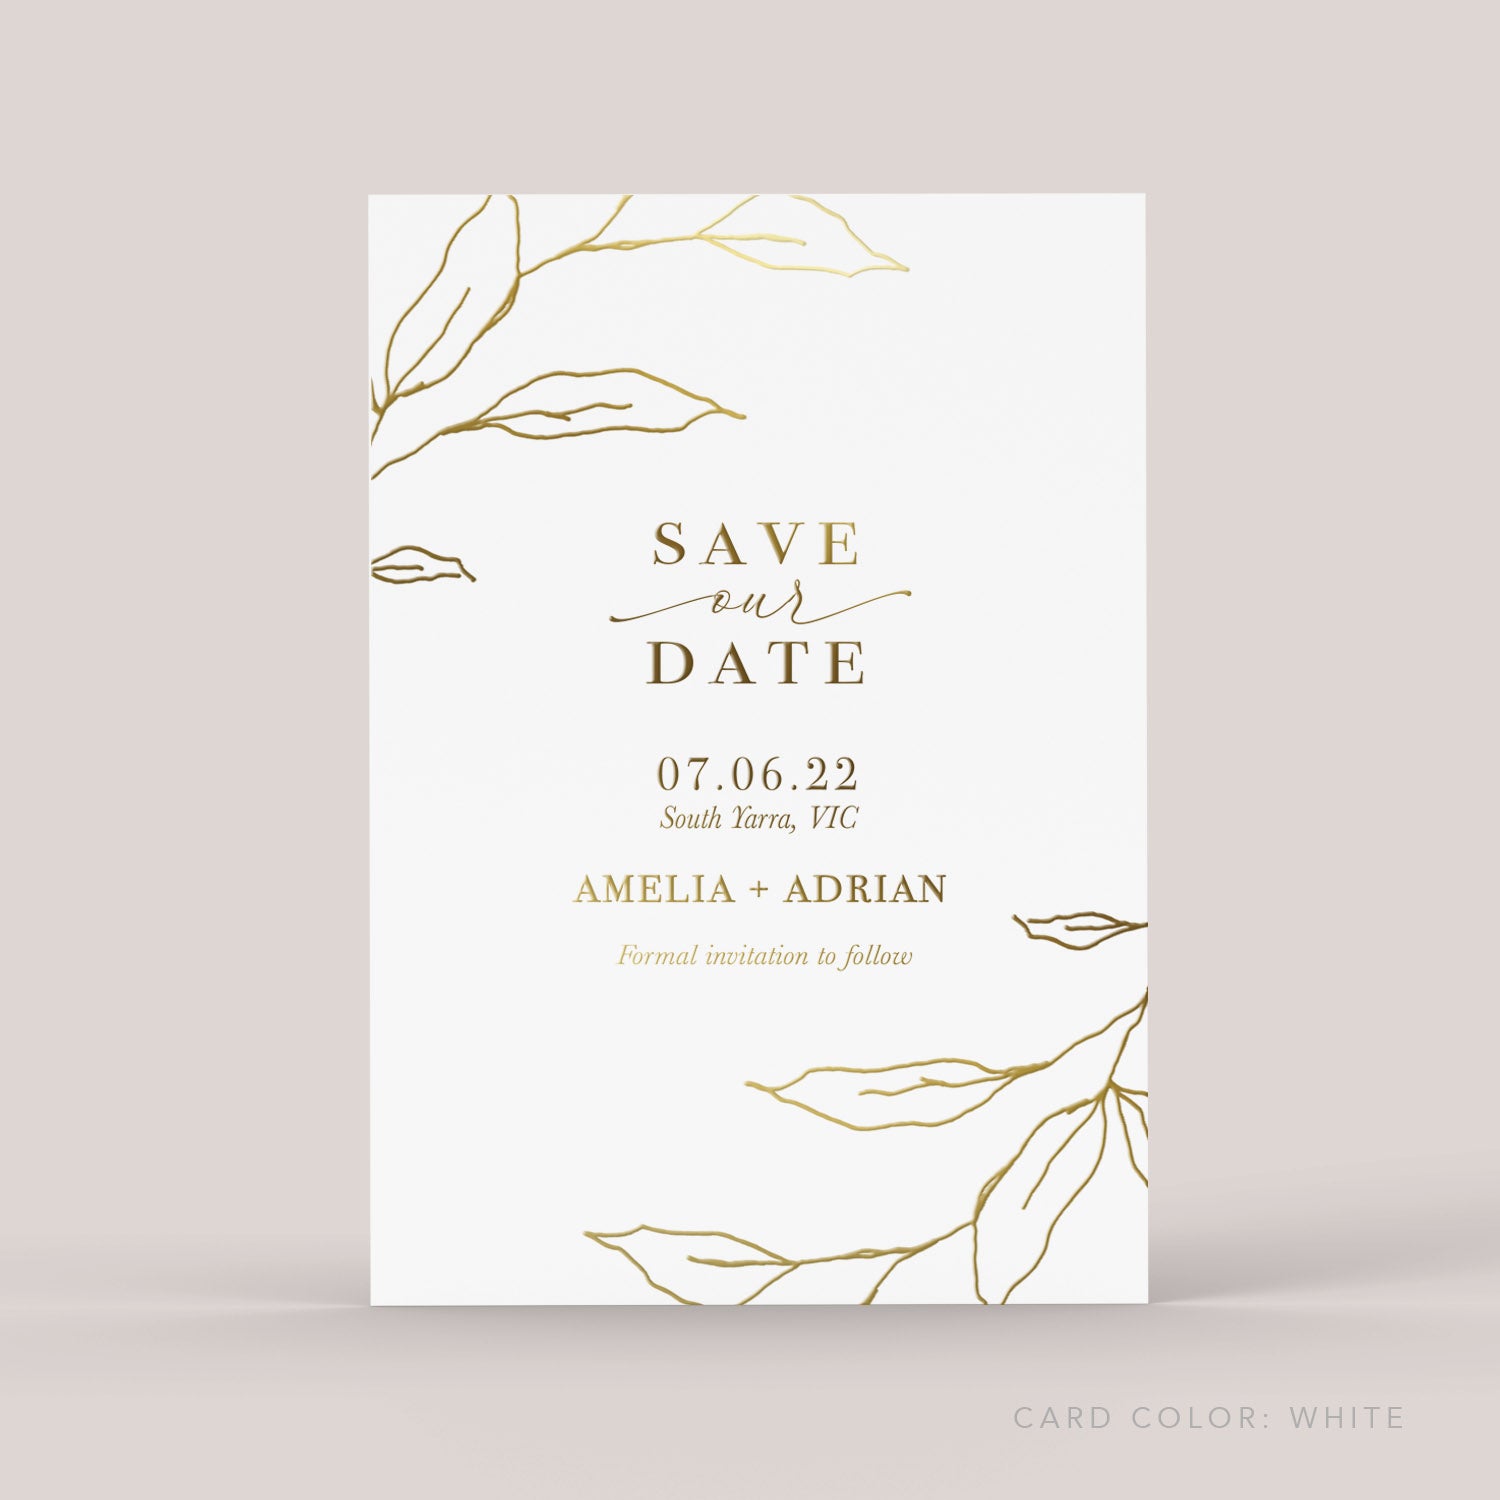 Our Date | Save the Date Cards